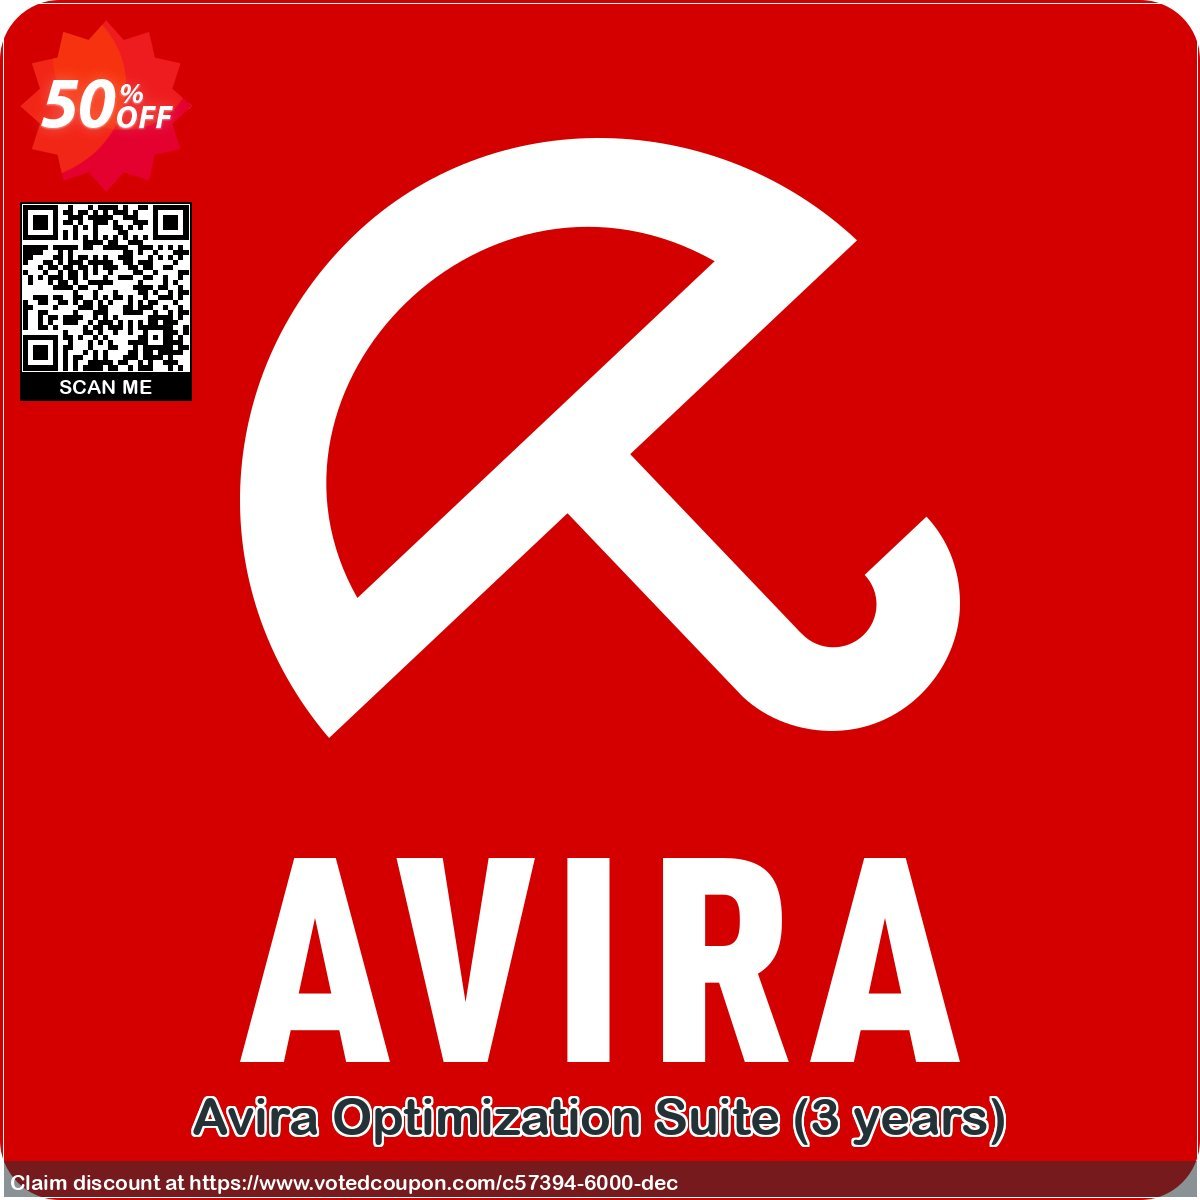 Avira Optimization Suite, 3 years  Coupon, discount 50% OFF Avira Optimization Suite (3 years), verified. Promotion: Fearsome promotions code of Avira Optimization Suite (3 years), tested & approved